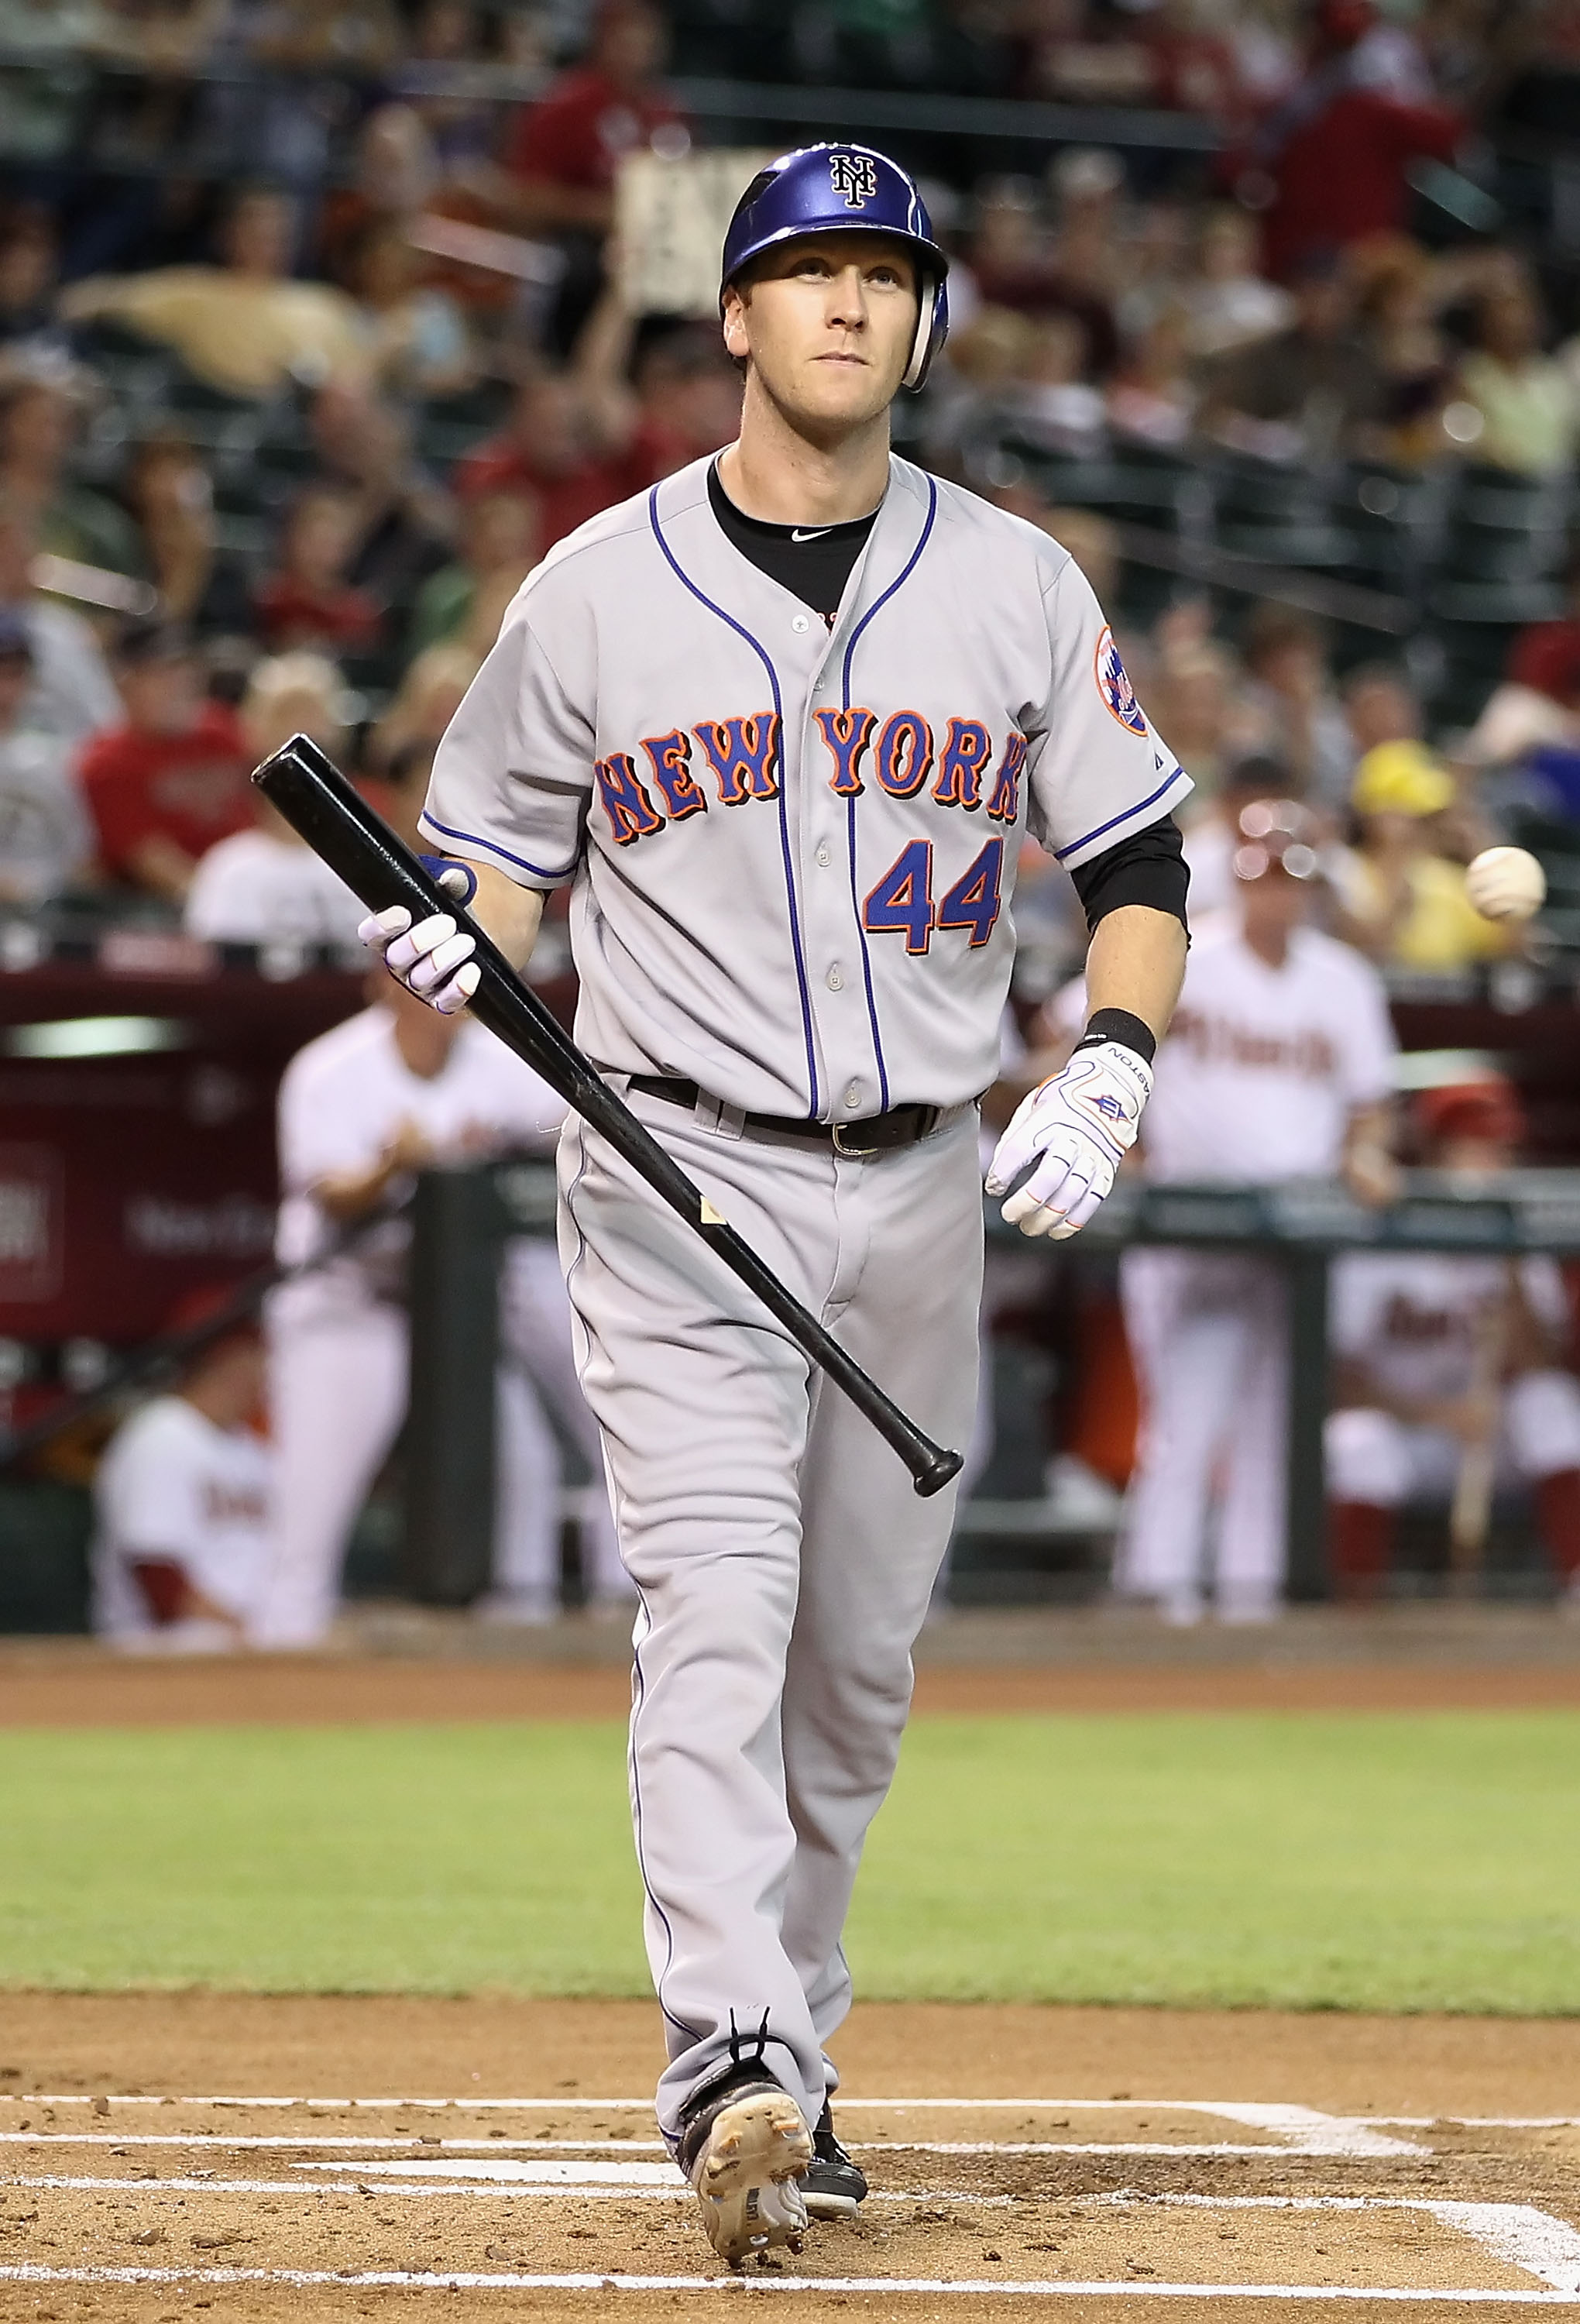 PHOENIX - JULY 20:  Jason Bay #44 of the New York Mets reacts after striking out against the Arizona Diamondbacks during the first inning of Major League Baseball game at Chase Field on July 20, 2010 in Phoenix, Arizona.  (Photo by Christian Petersen/Gett